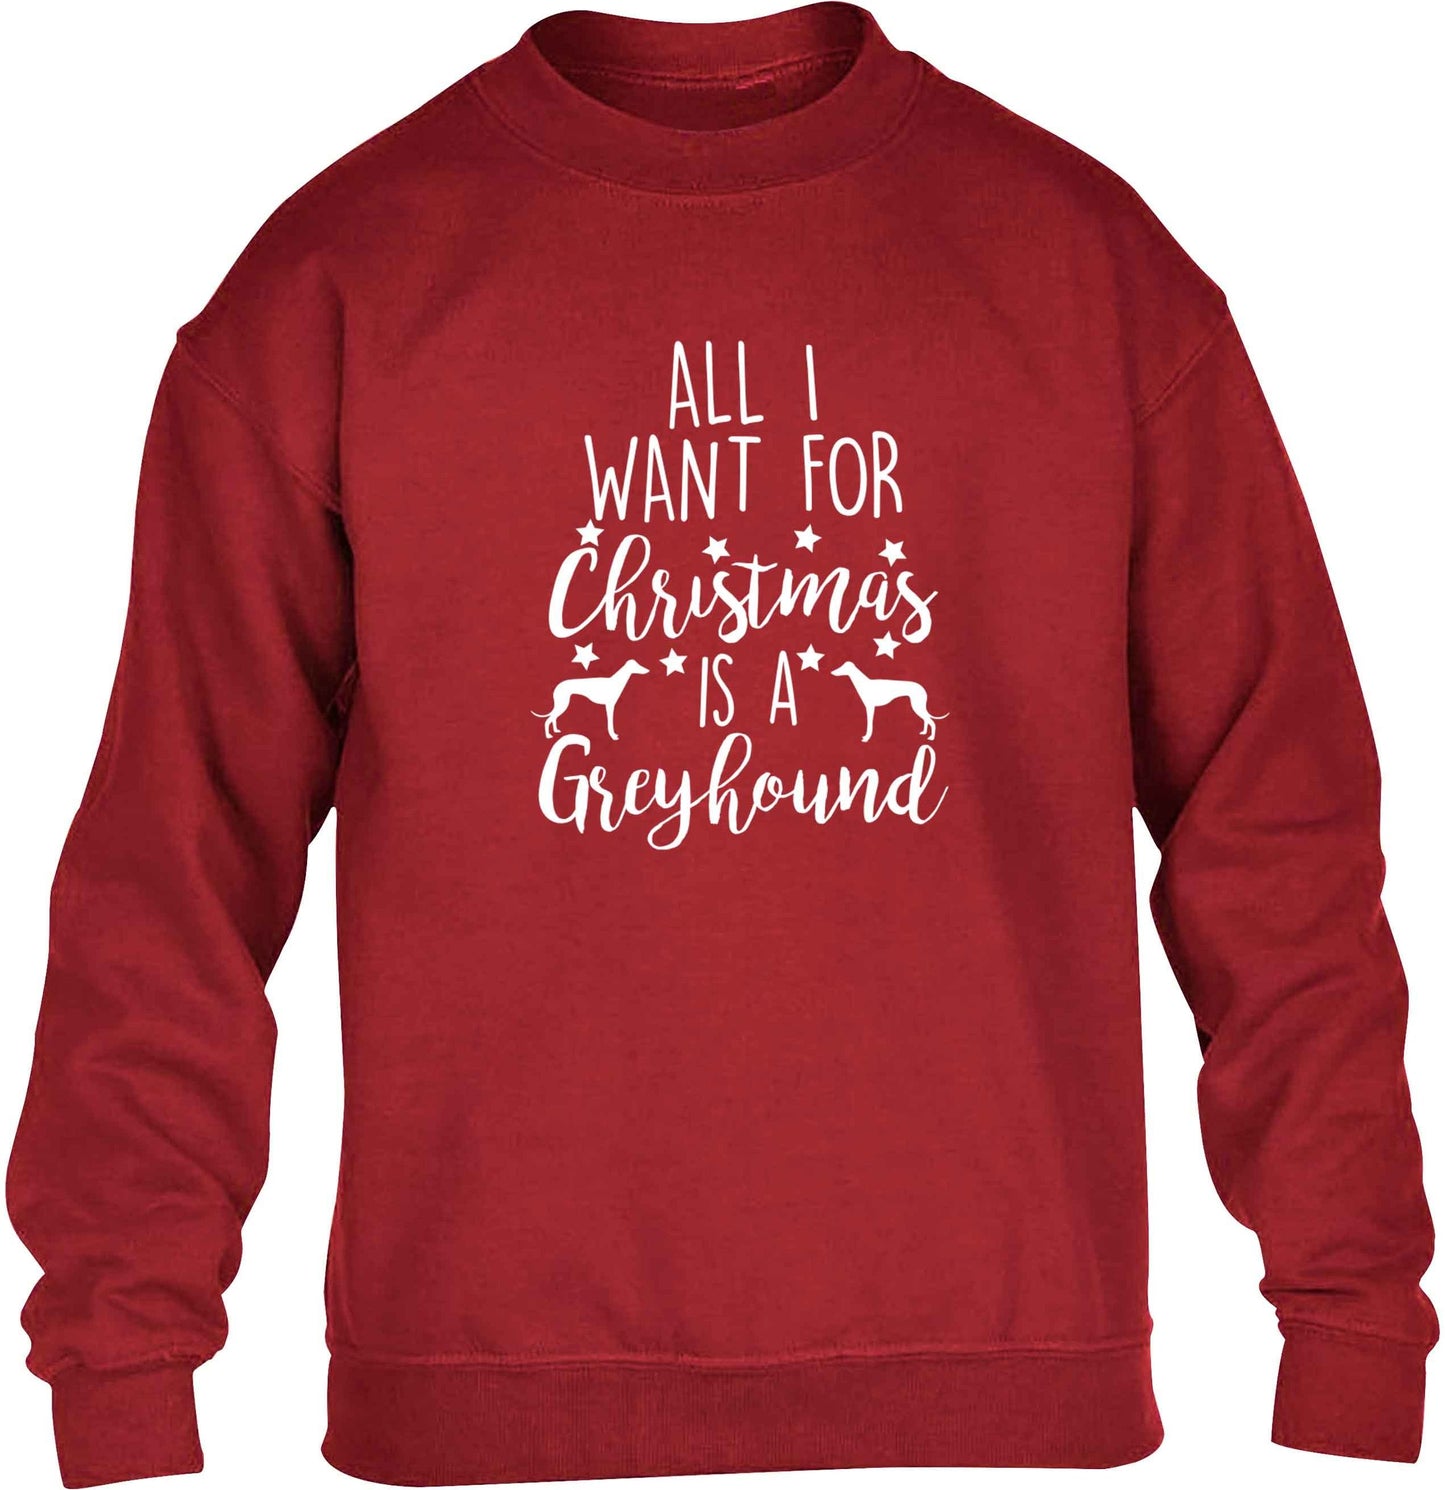 All I want for Christmas is a greyhound children's grey sweater 12-13 Years